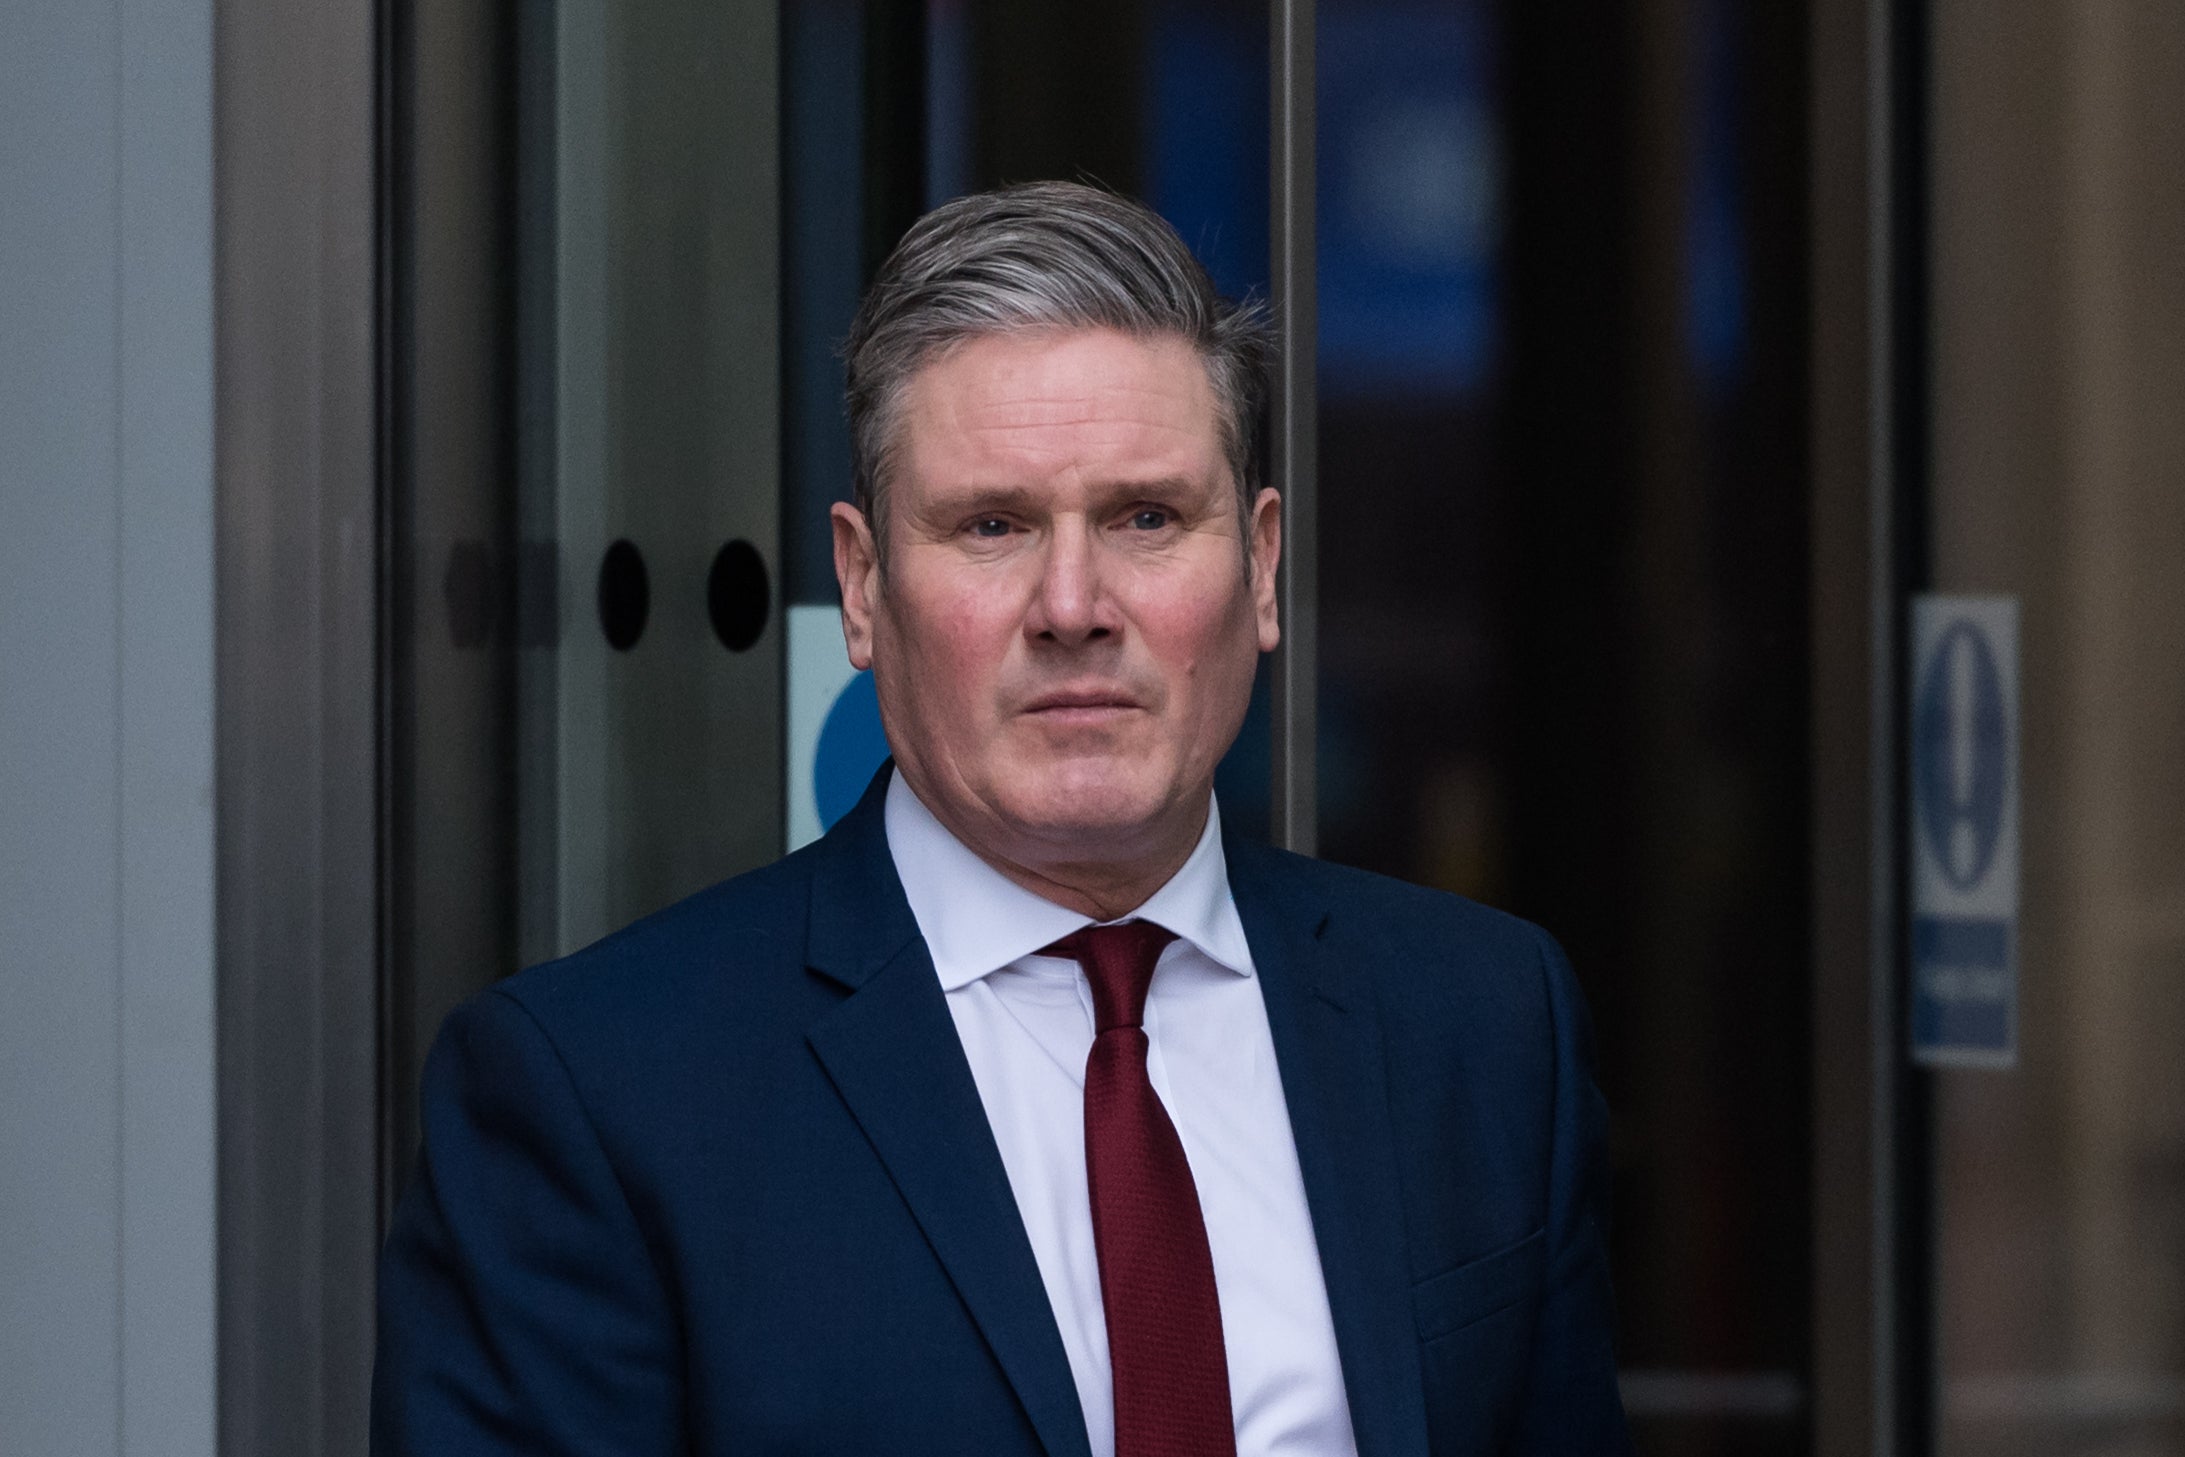 Keir Starmer, coming out of a revolving door